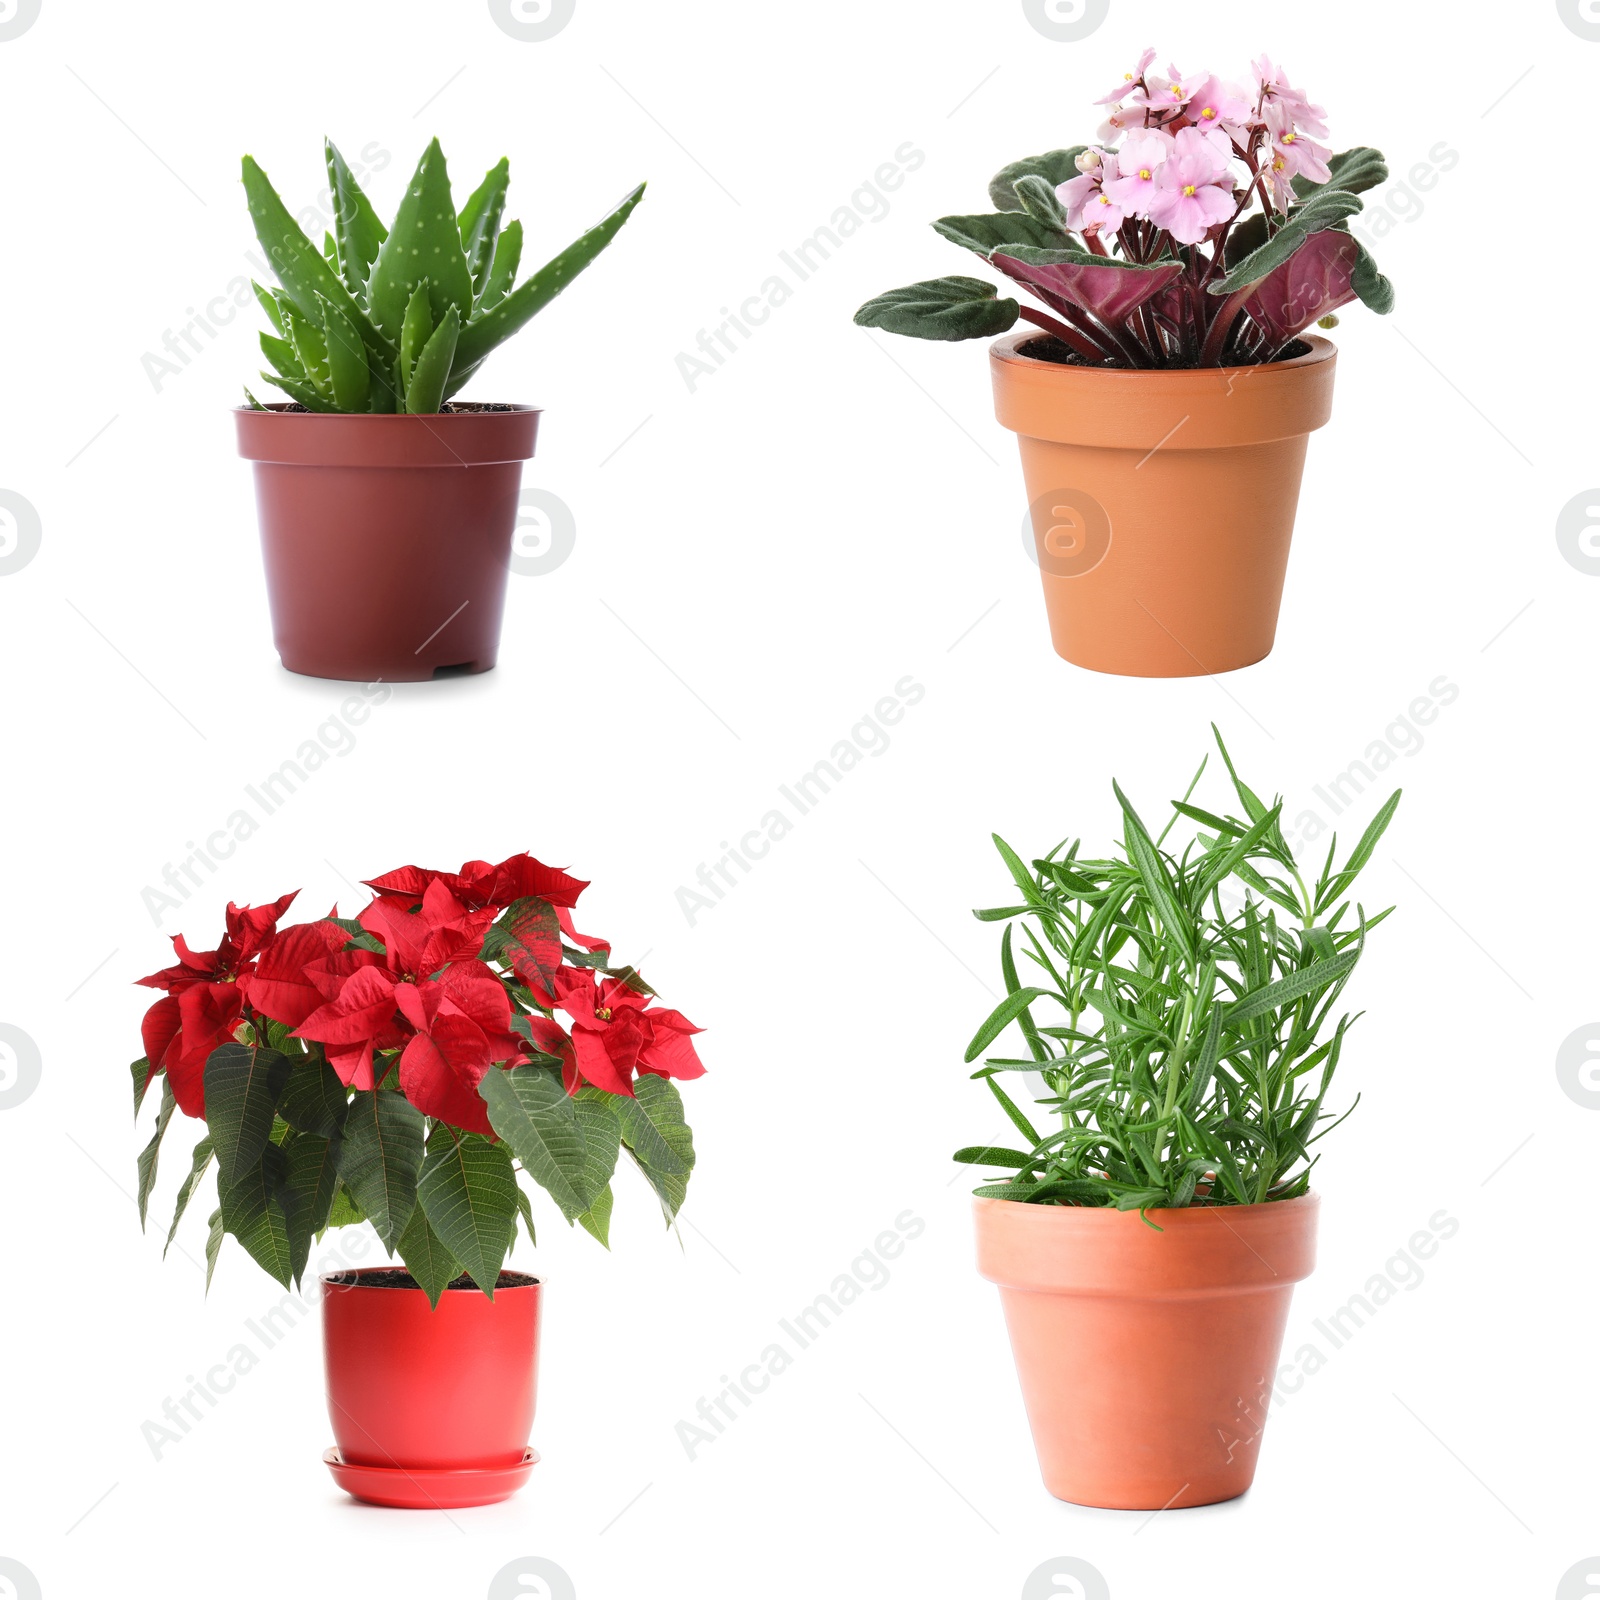 Image of Set of different houseplants in flower pots on white background